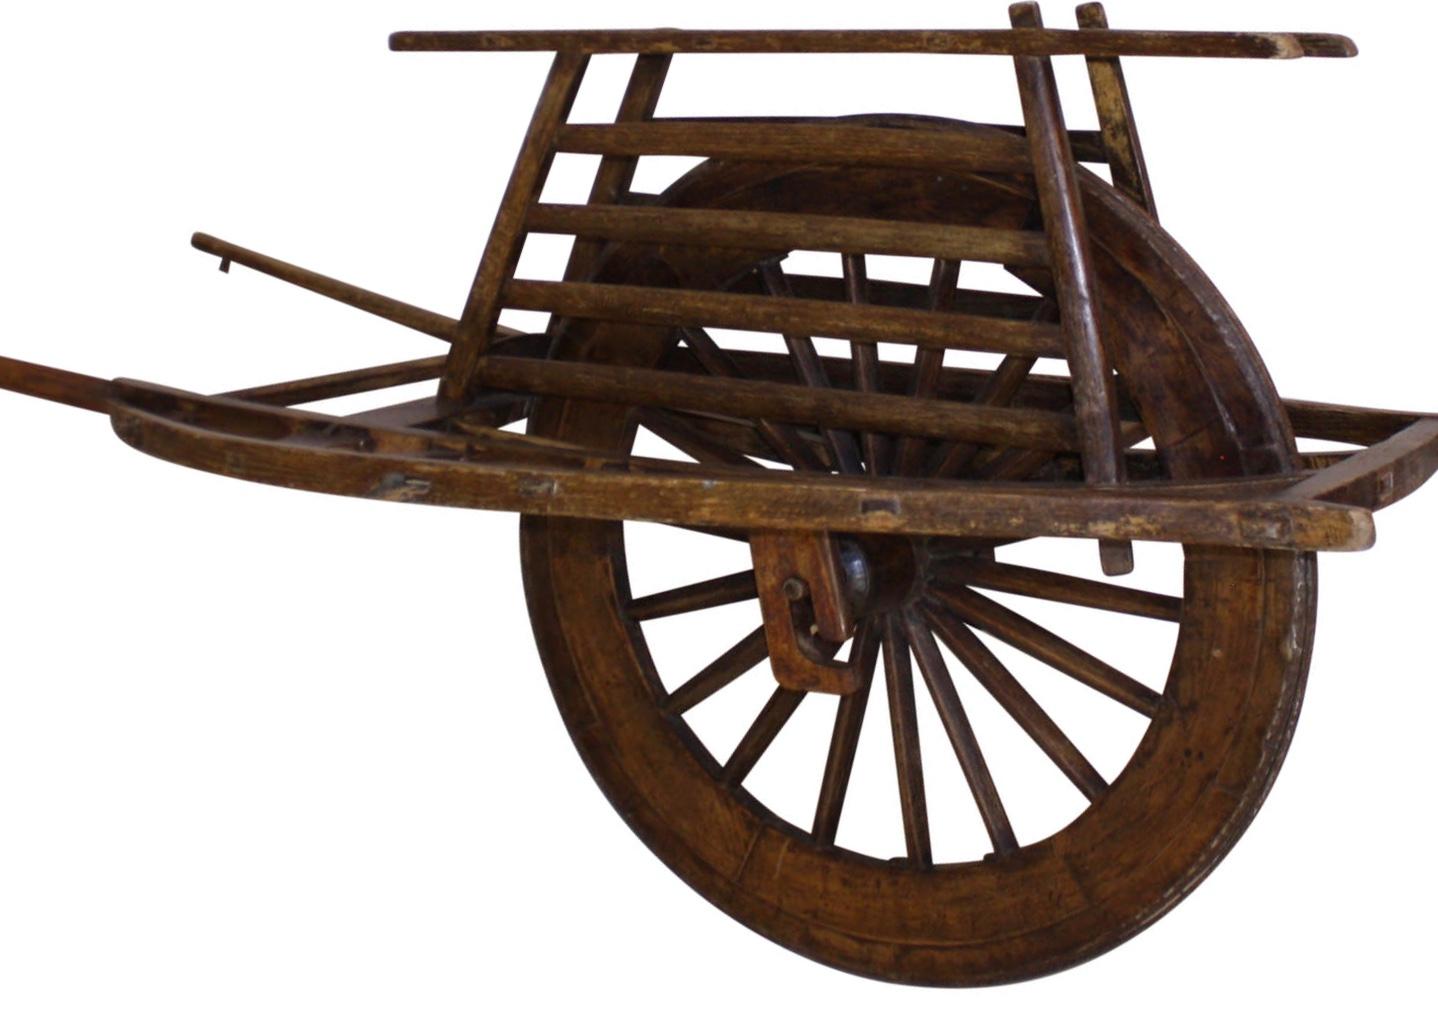 This wheelbarrow has a single, three-foot wheel with a carrying surface that encases the top of the wheel and is flanked by a platform on each side. The platform was designed for transporting supplies and people. The wheel's axle attaches to the